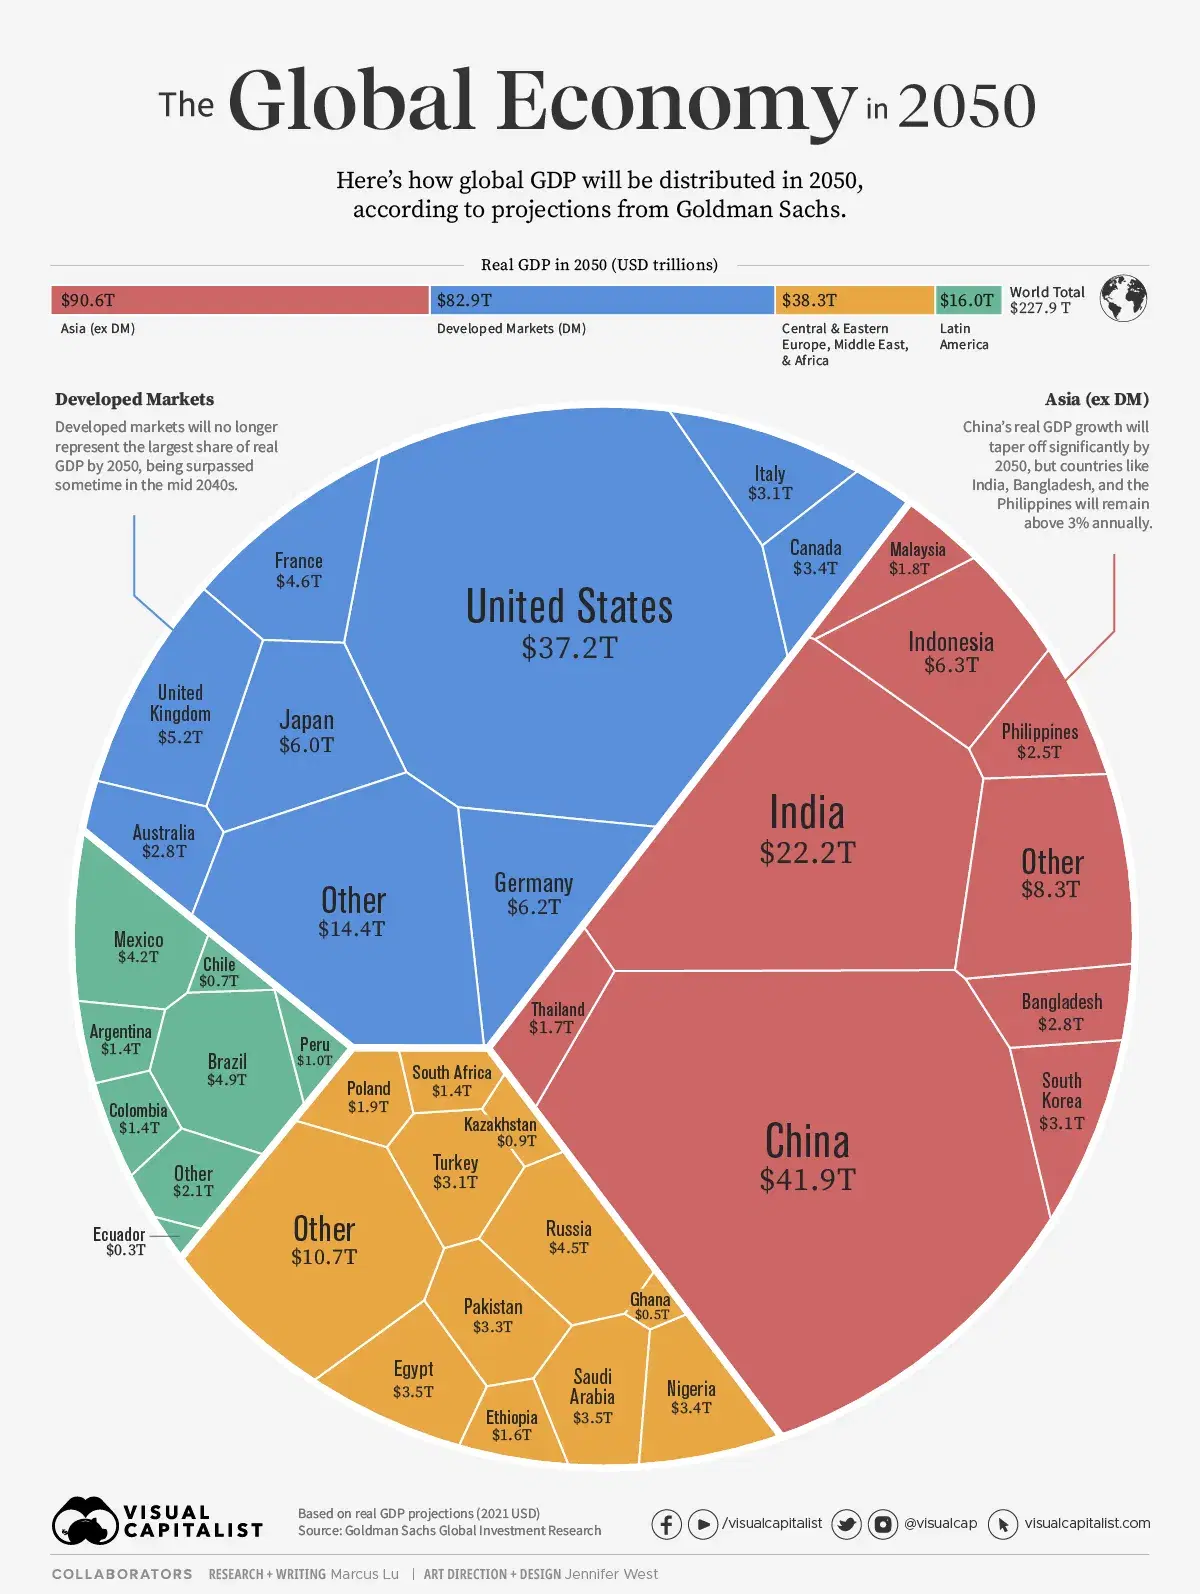 Visualizing the Future Global Economy by GDP in 2050